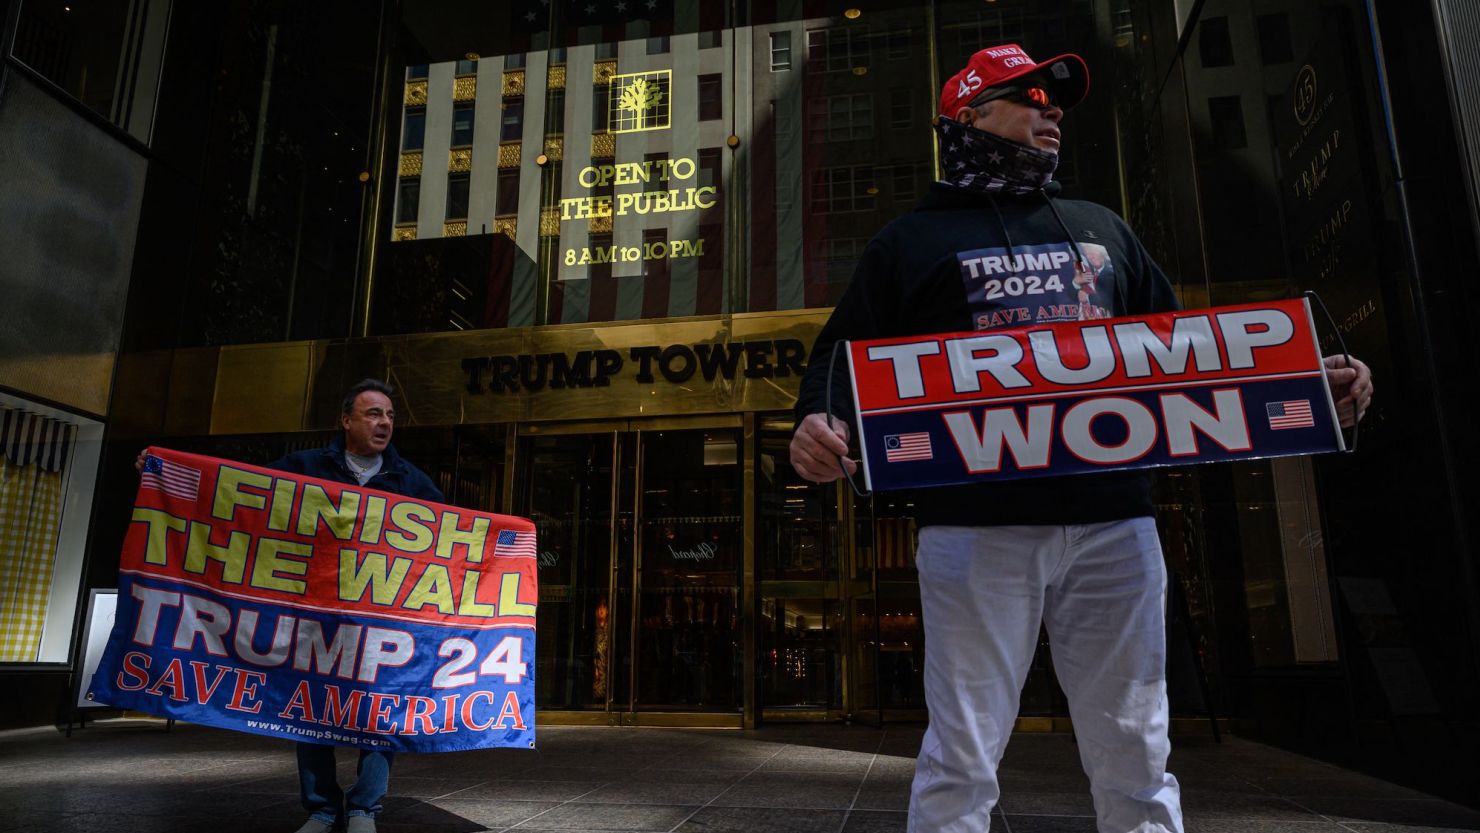 TOPSHOT - Supporters of former US President Donald Trump gather outside Trump tower in New York City on March 20, 2023. - Former US President Donald Trump said he expects to be "arrested" on Tuesday, March 21, 2023, over an alleged hush-money payment to a porn star in 2016 and he urged his supporters to protest, as prosecutors gave signs of moving closer to an indictment. (Photo by Ed JONES / AFP) (Photo by ED JONES/AFP via Getty Images)